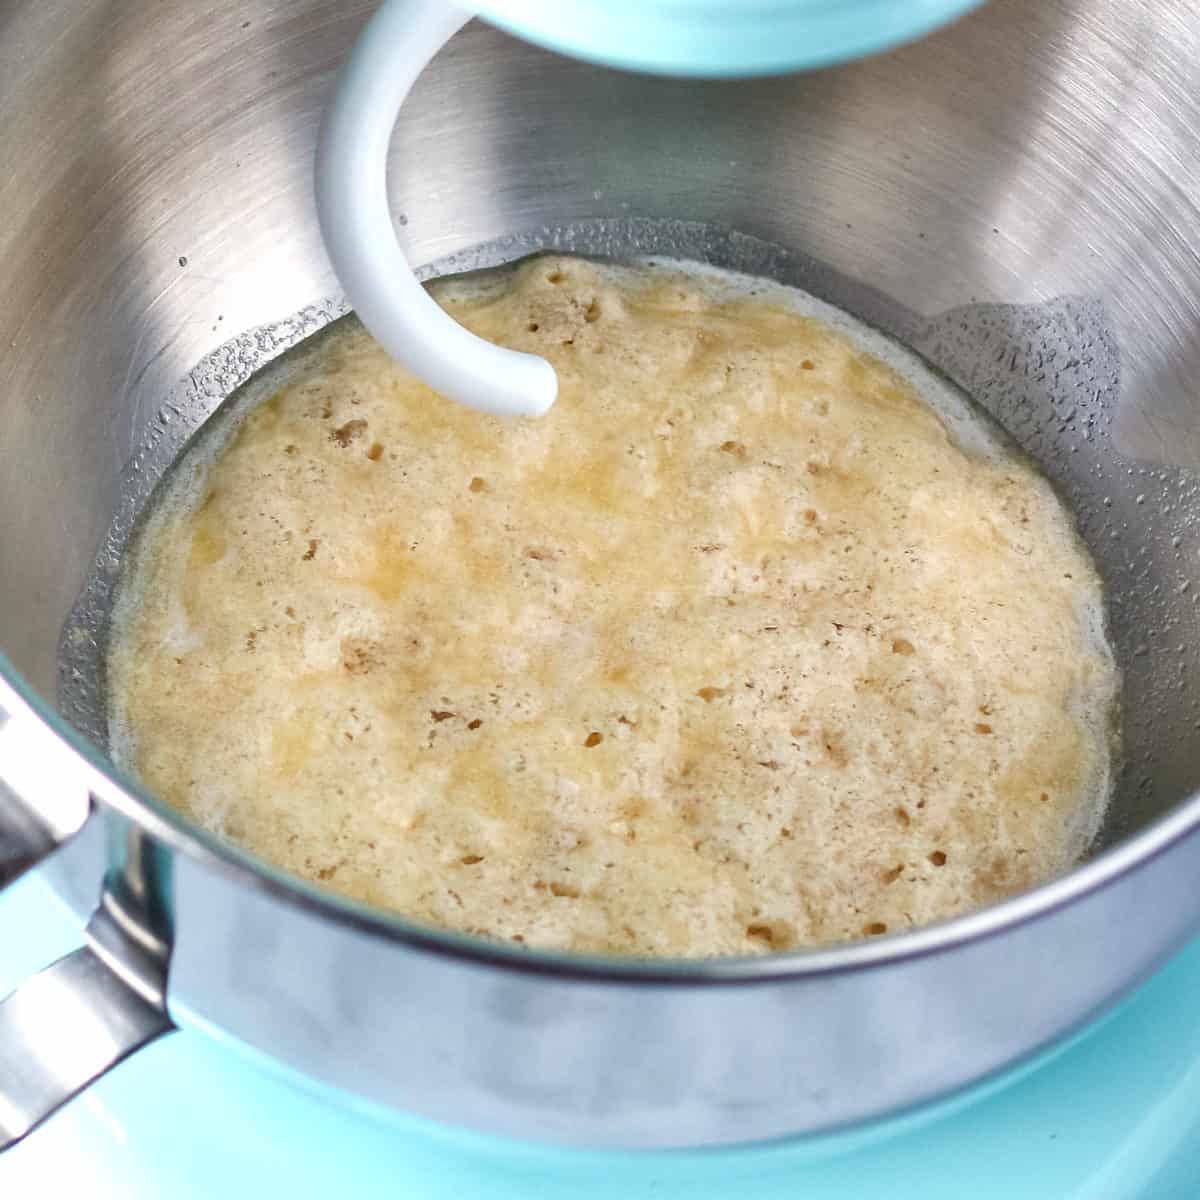 Foamy activated yeast mixture in the metal mixing bowl of a blue stand mixer.